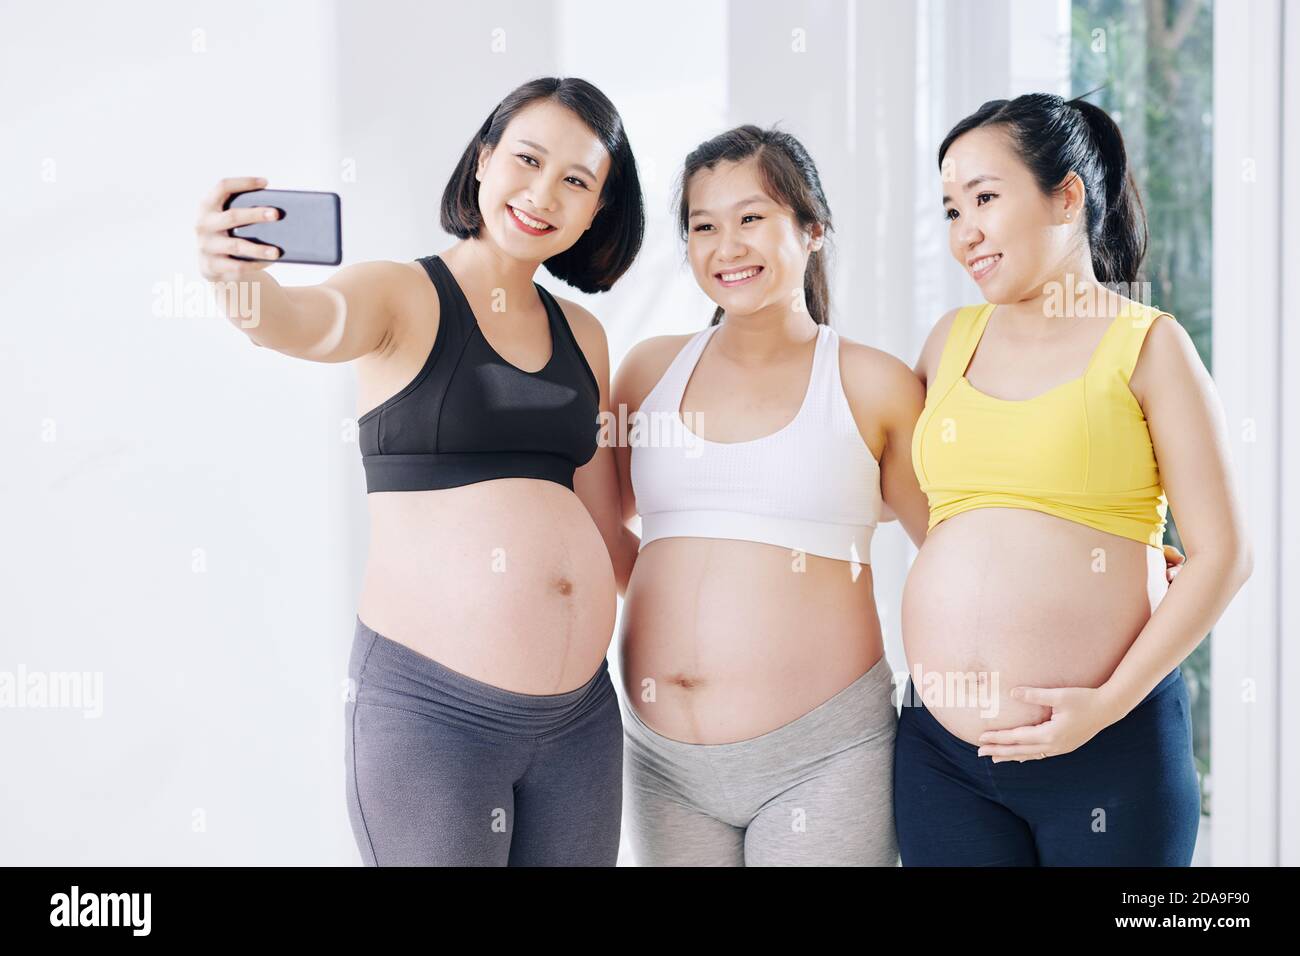 Pretty smiling pregnant Asian woman taking selfie with other pregnant women after yoga class Stock Photo